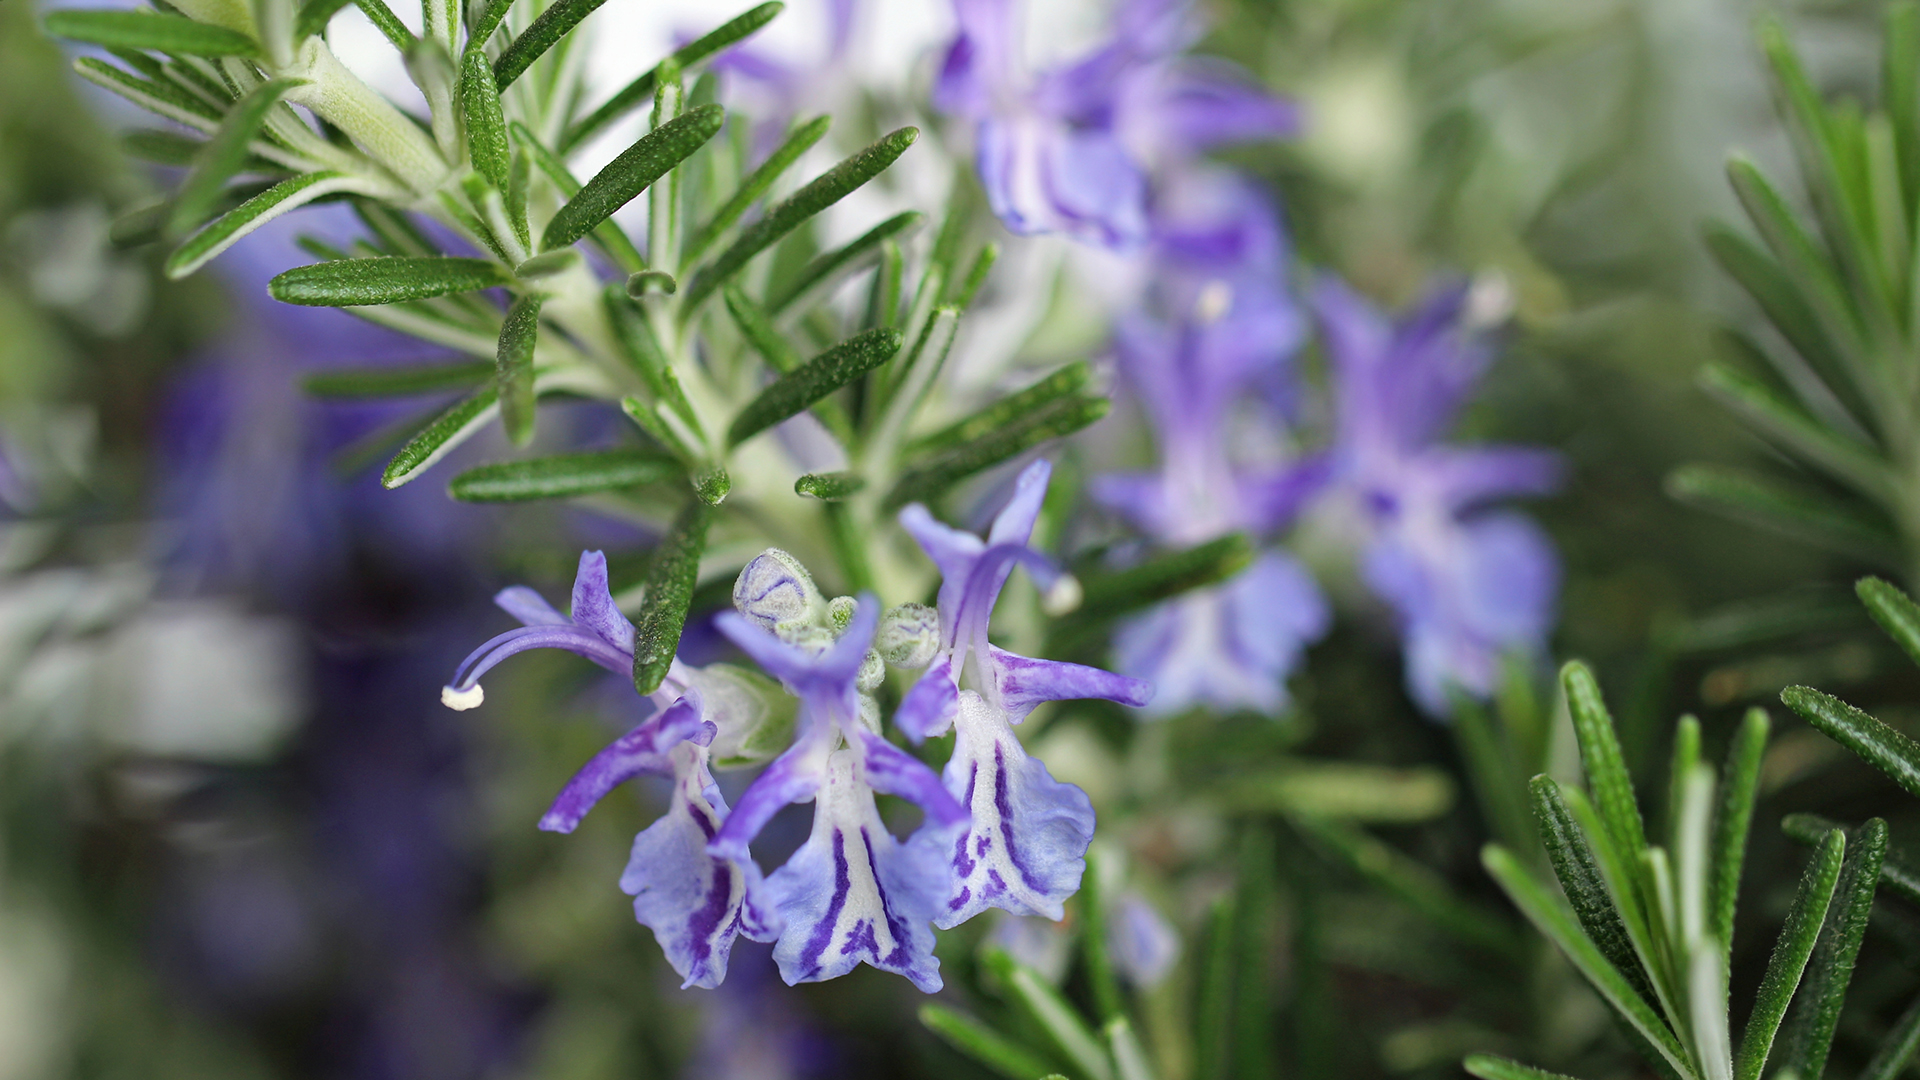 Rosemary with purple flowers showing.